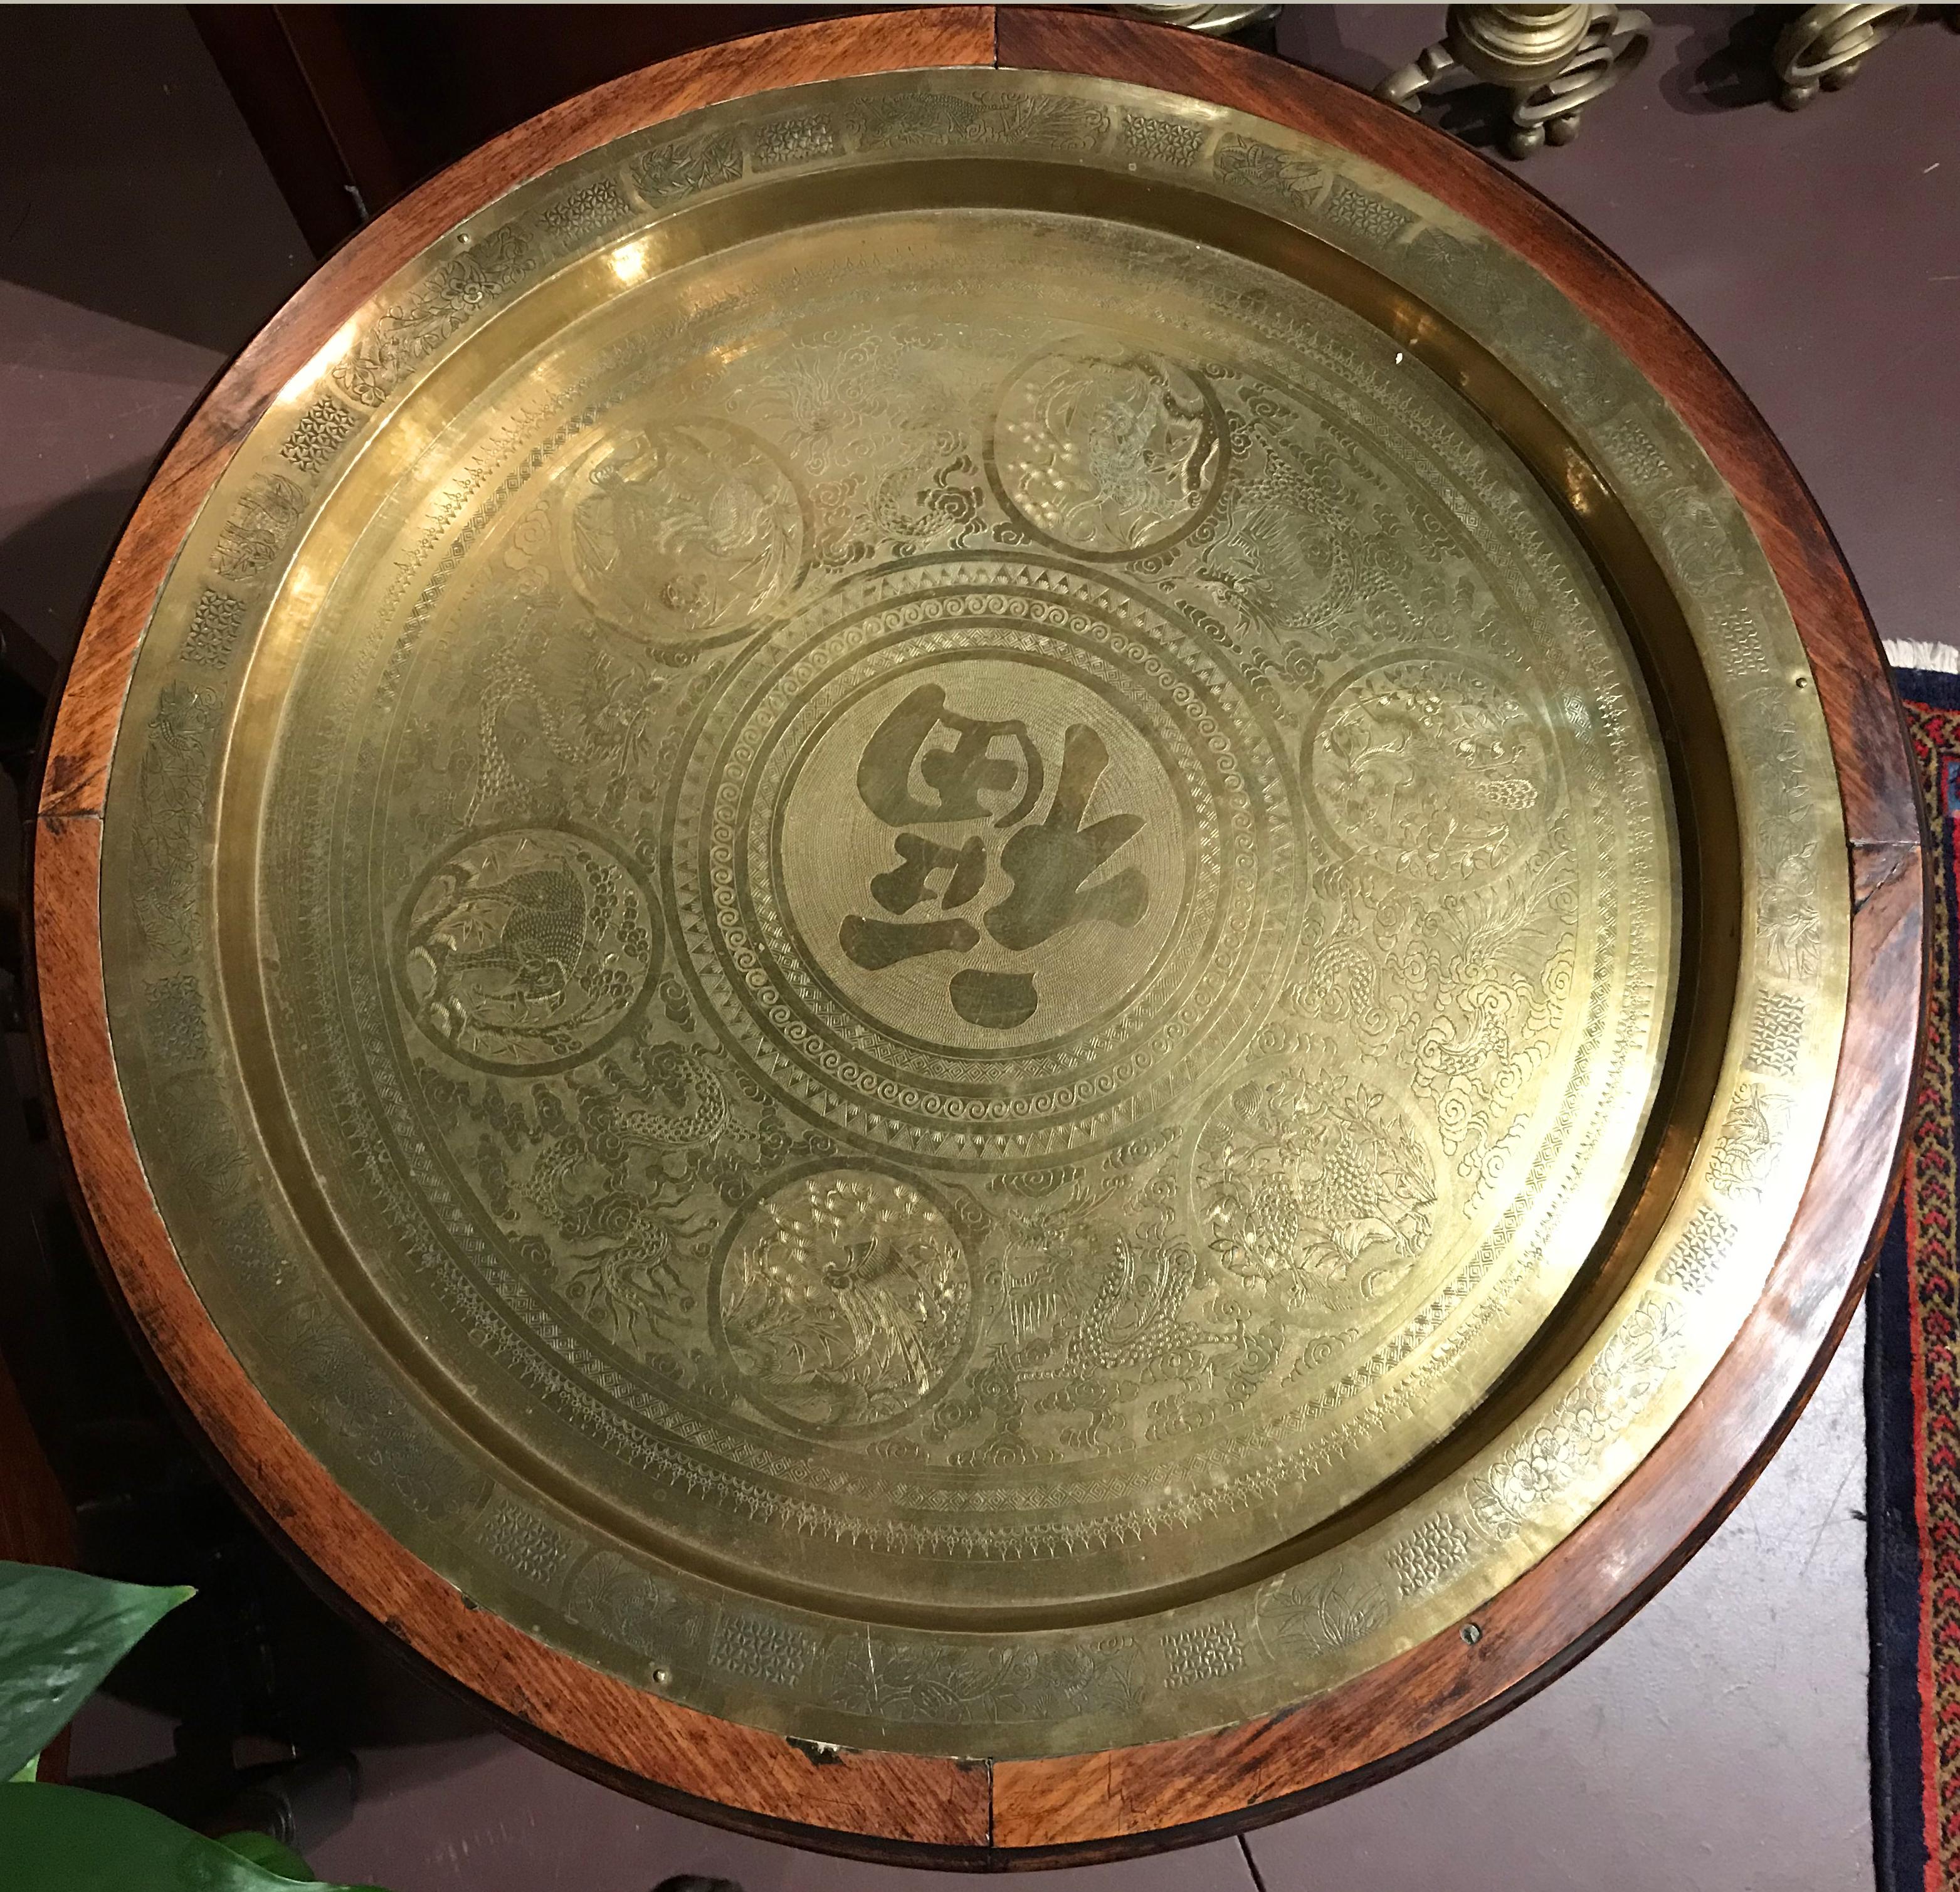 A fine reticulated foliate carved Chinese hardwood folding table with removable brass tray top encased in a wood border. The tray is decorated with a central Chinese character, surrounded by featured round animal scenes, with dragons in between each